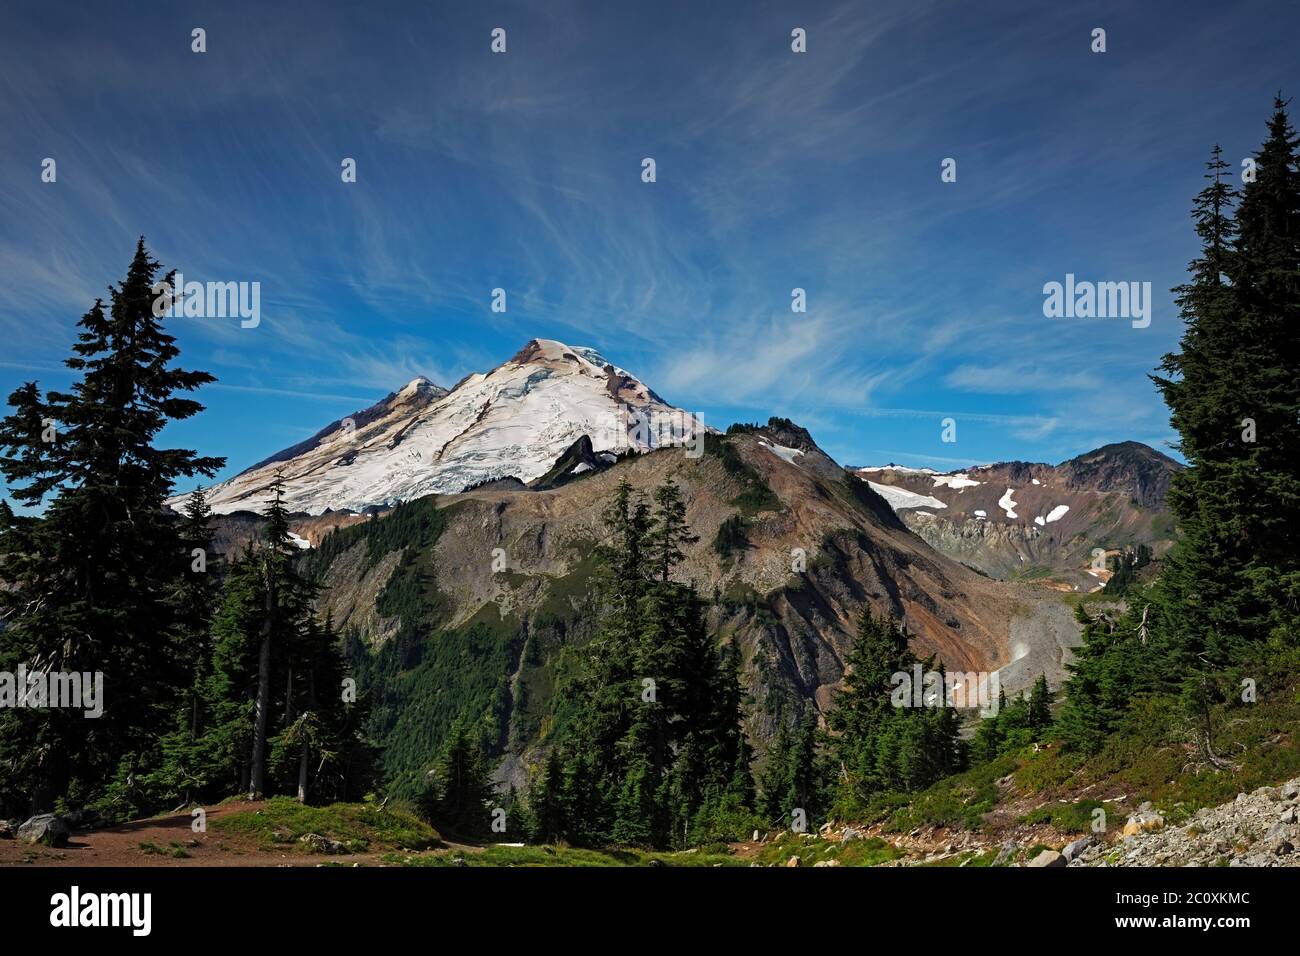 WA16719-00...WASHINGTON - Mount Baker viewed from Artist Point in Heather Meadows Recreation Area of Mount Baker - Snoqualmie National Forest. Stock Photo